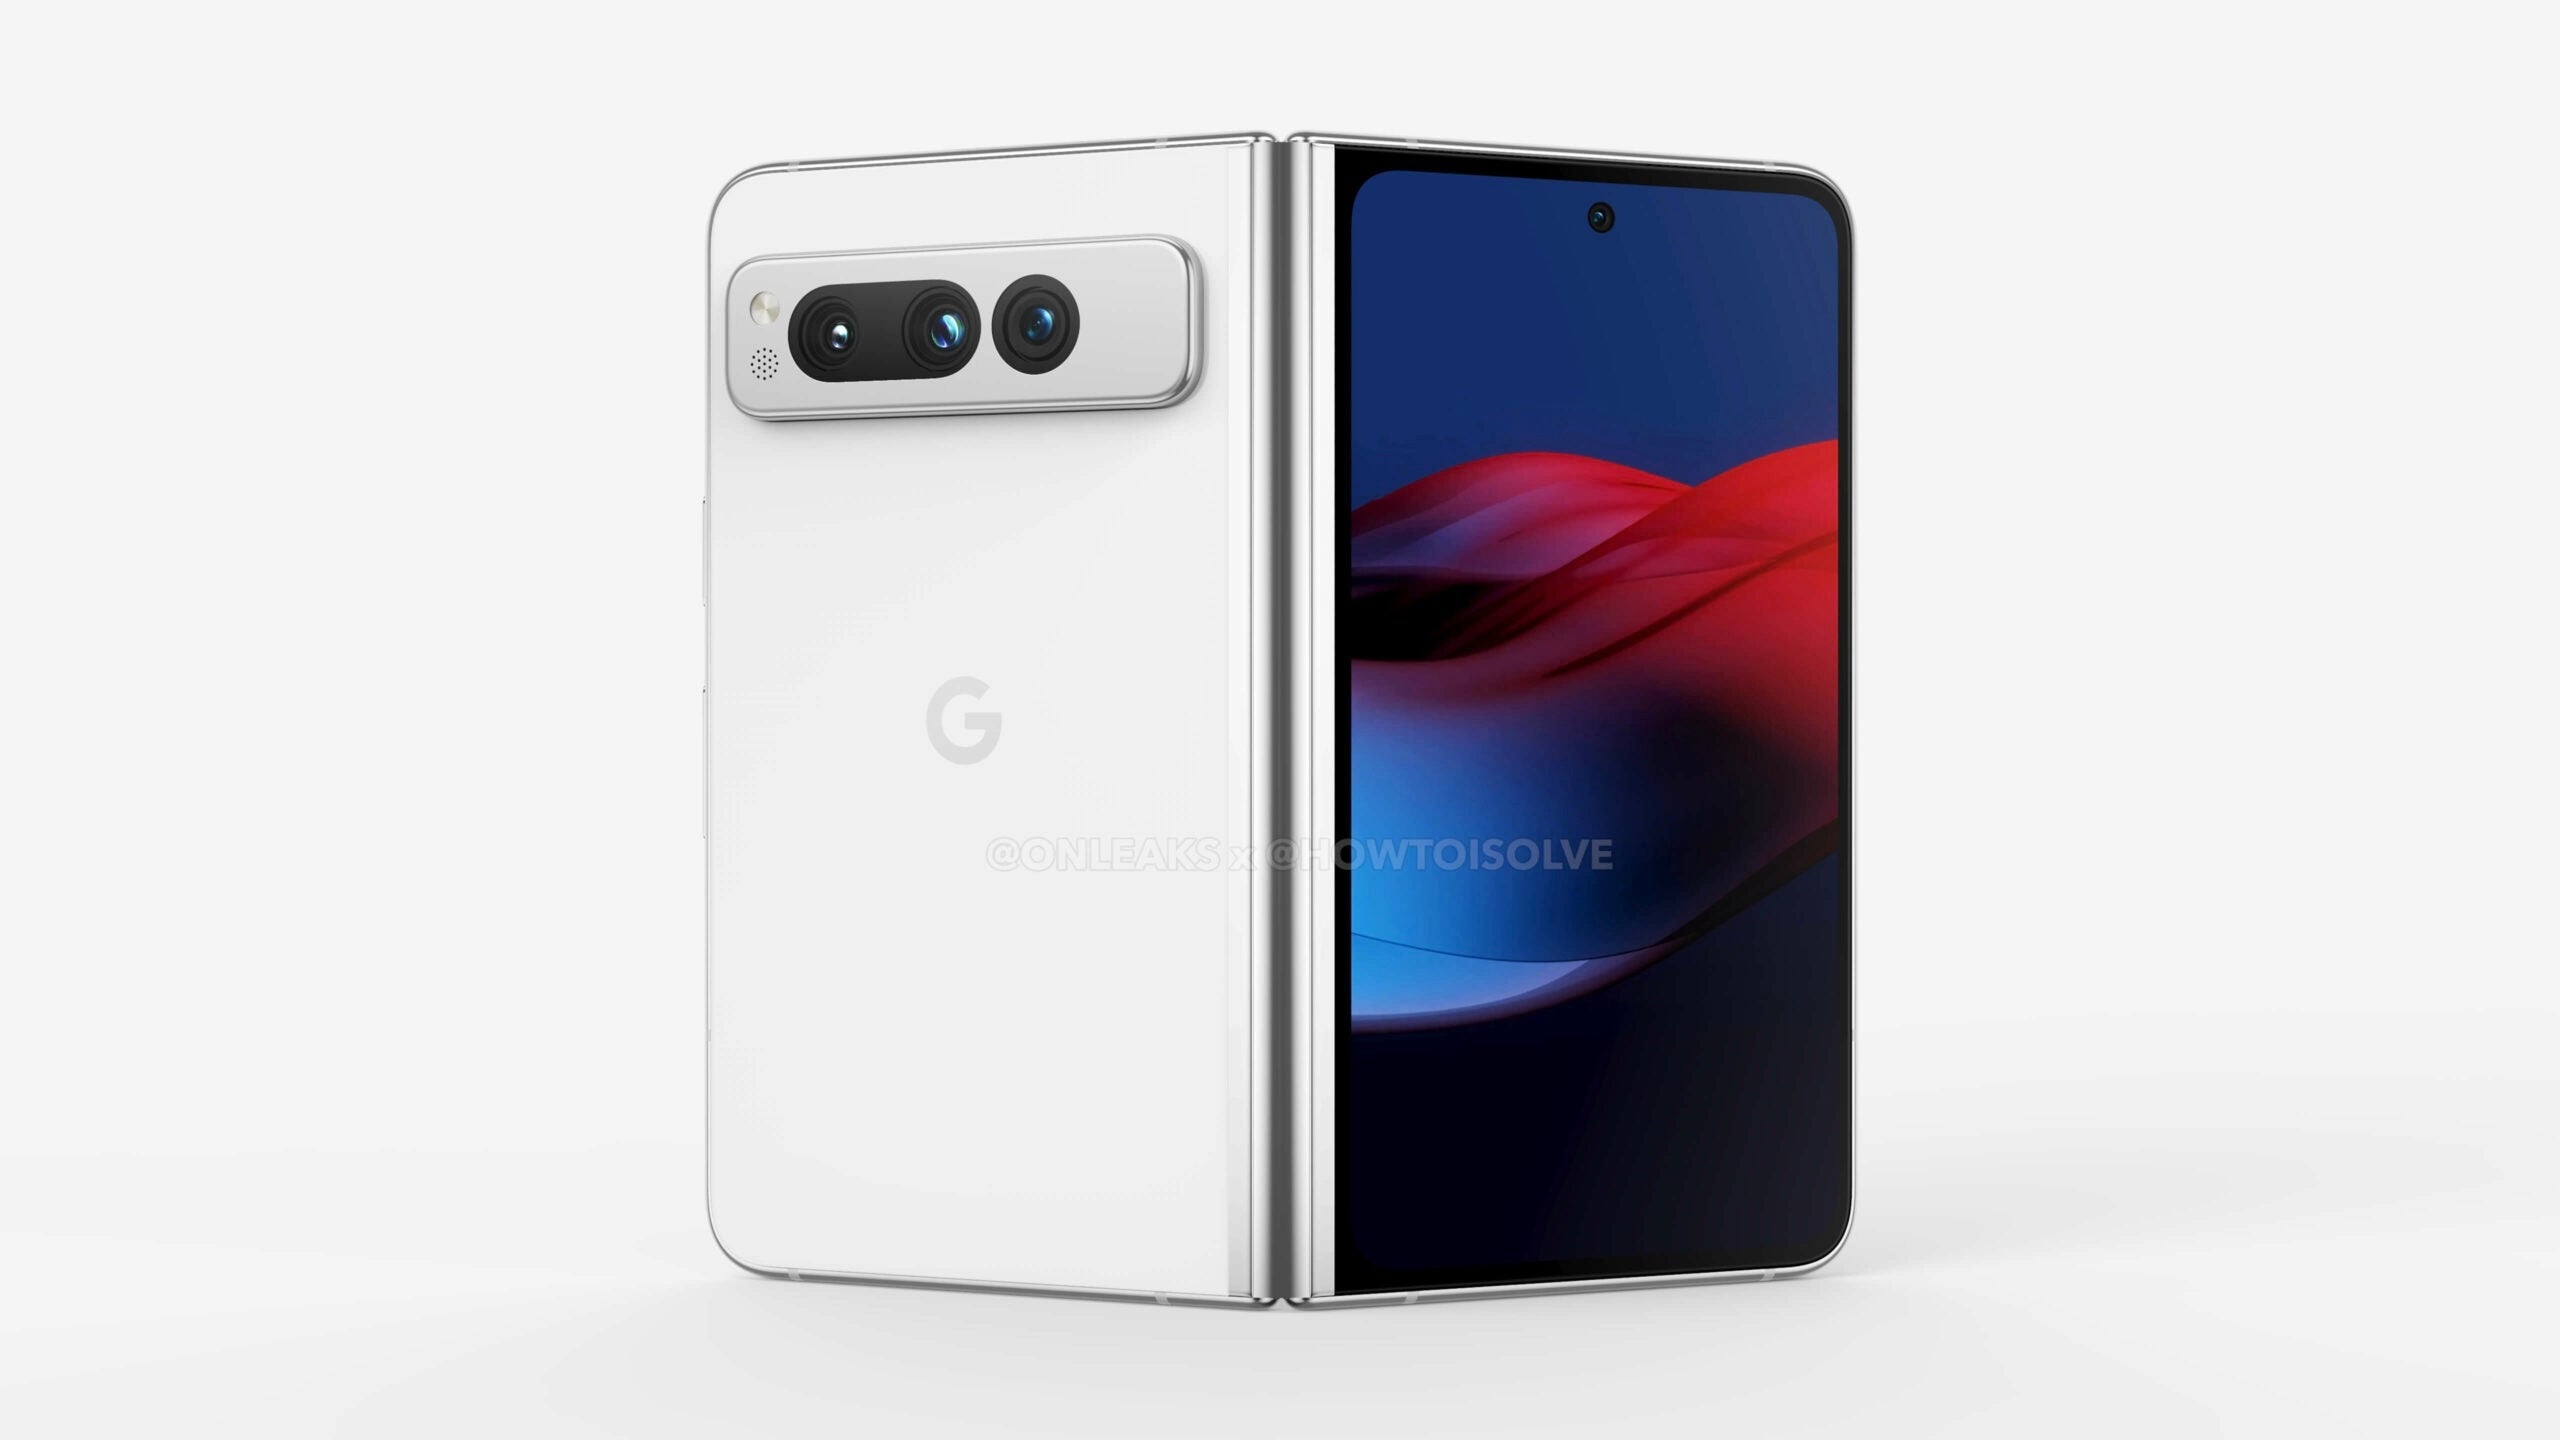 Image Credit - @OnLeaks &amp;amp; HowToiSolve - Google Pixel Fold: Is this the beginning of the post-Samsung foldable era?